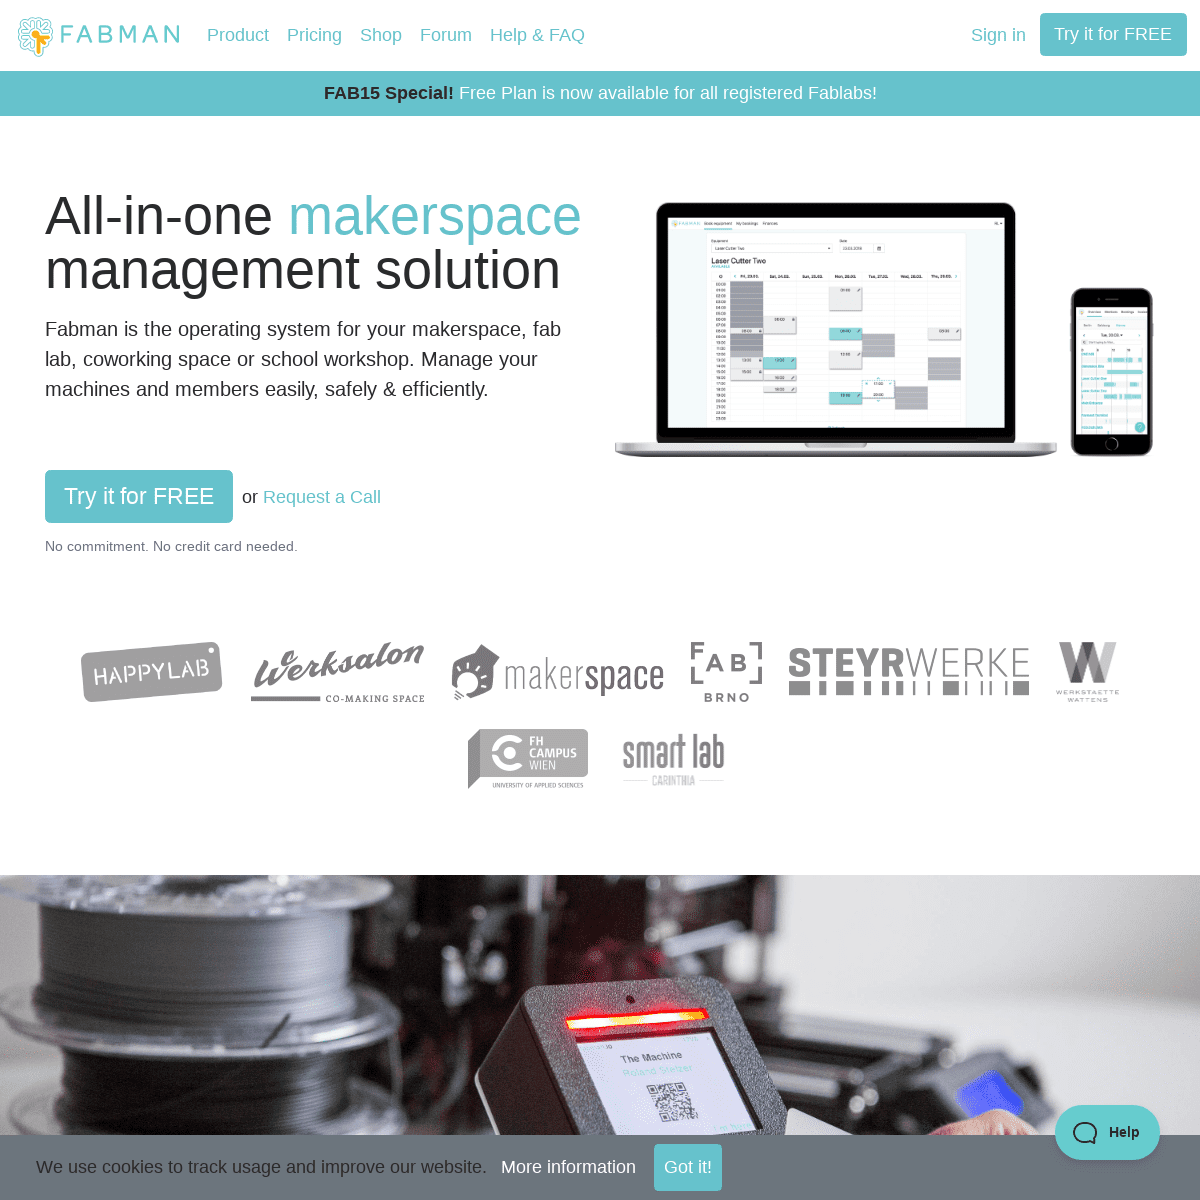 Fabman: All-in-One Makerspace Management Solution